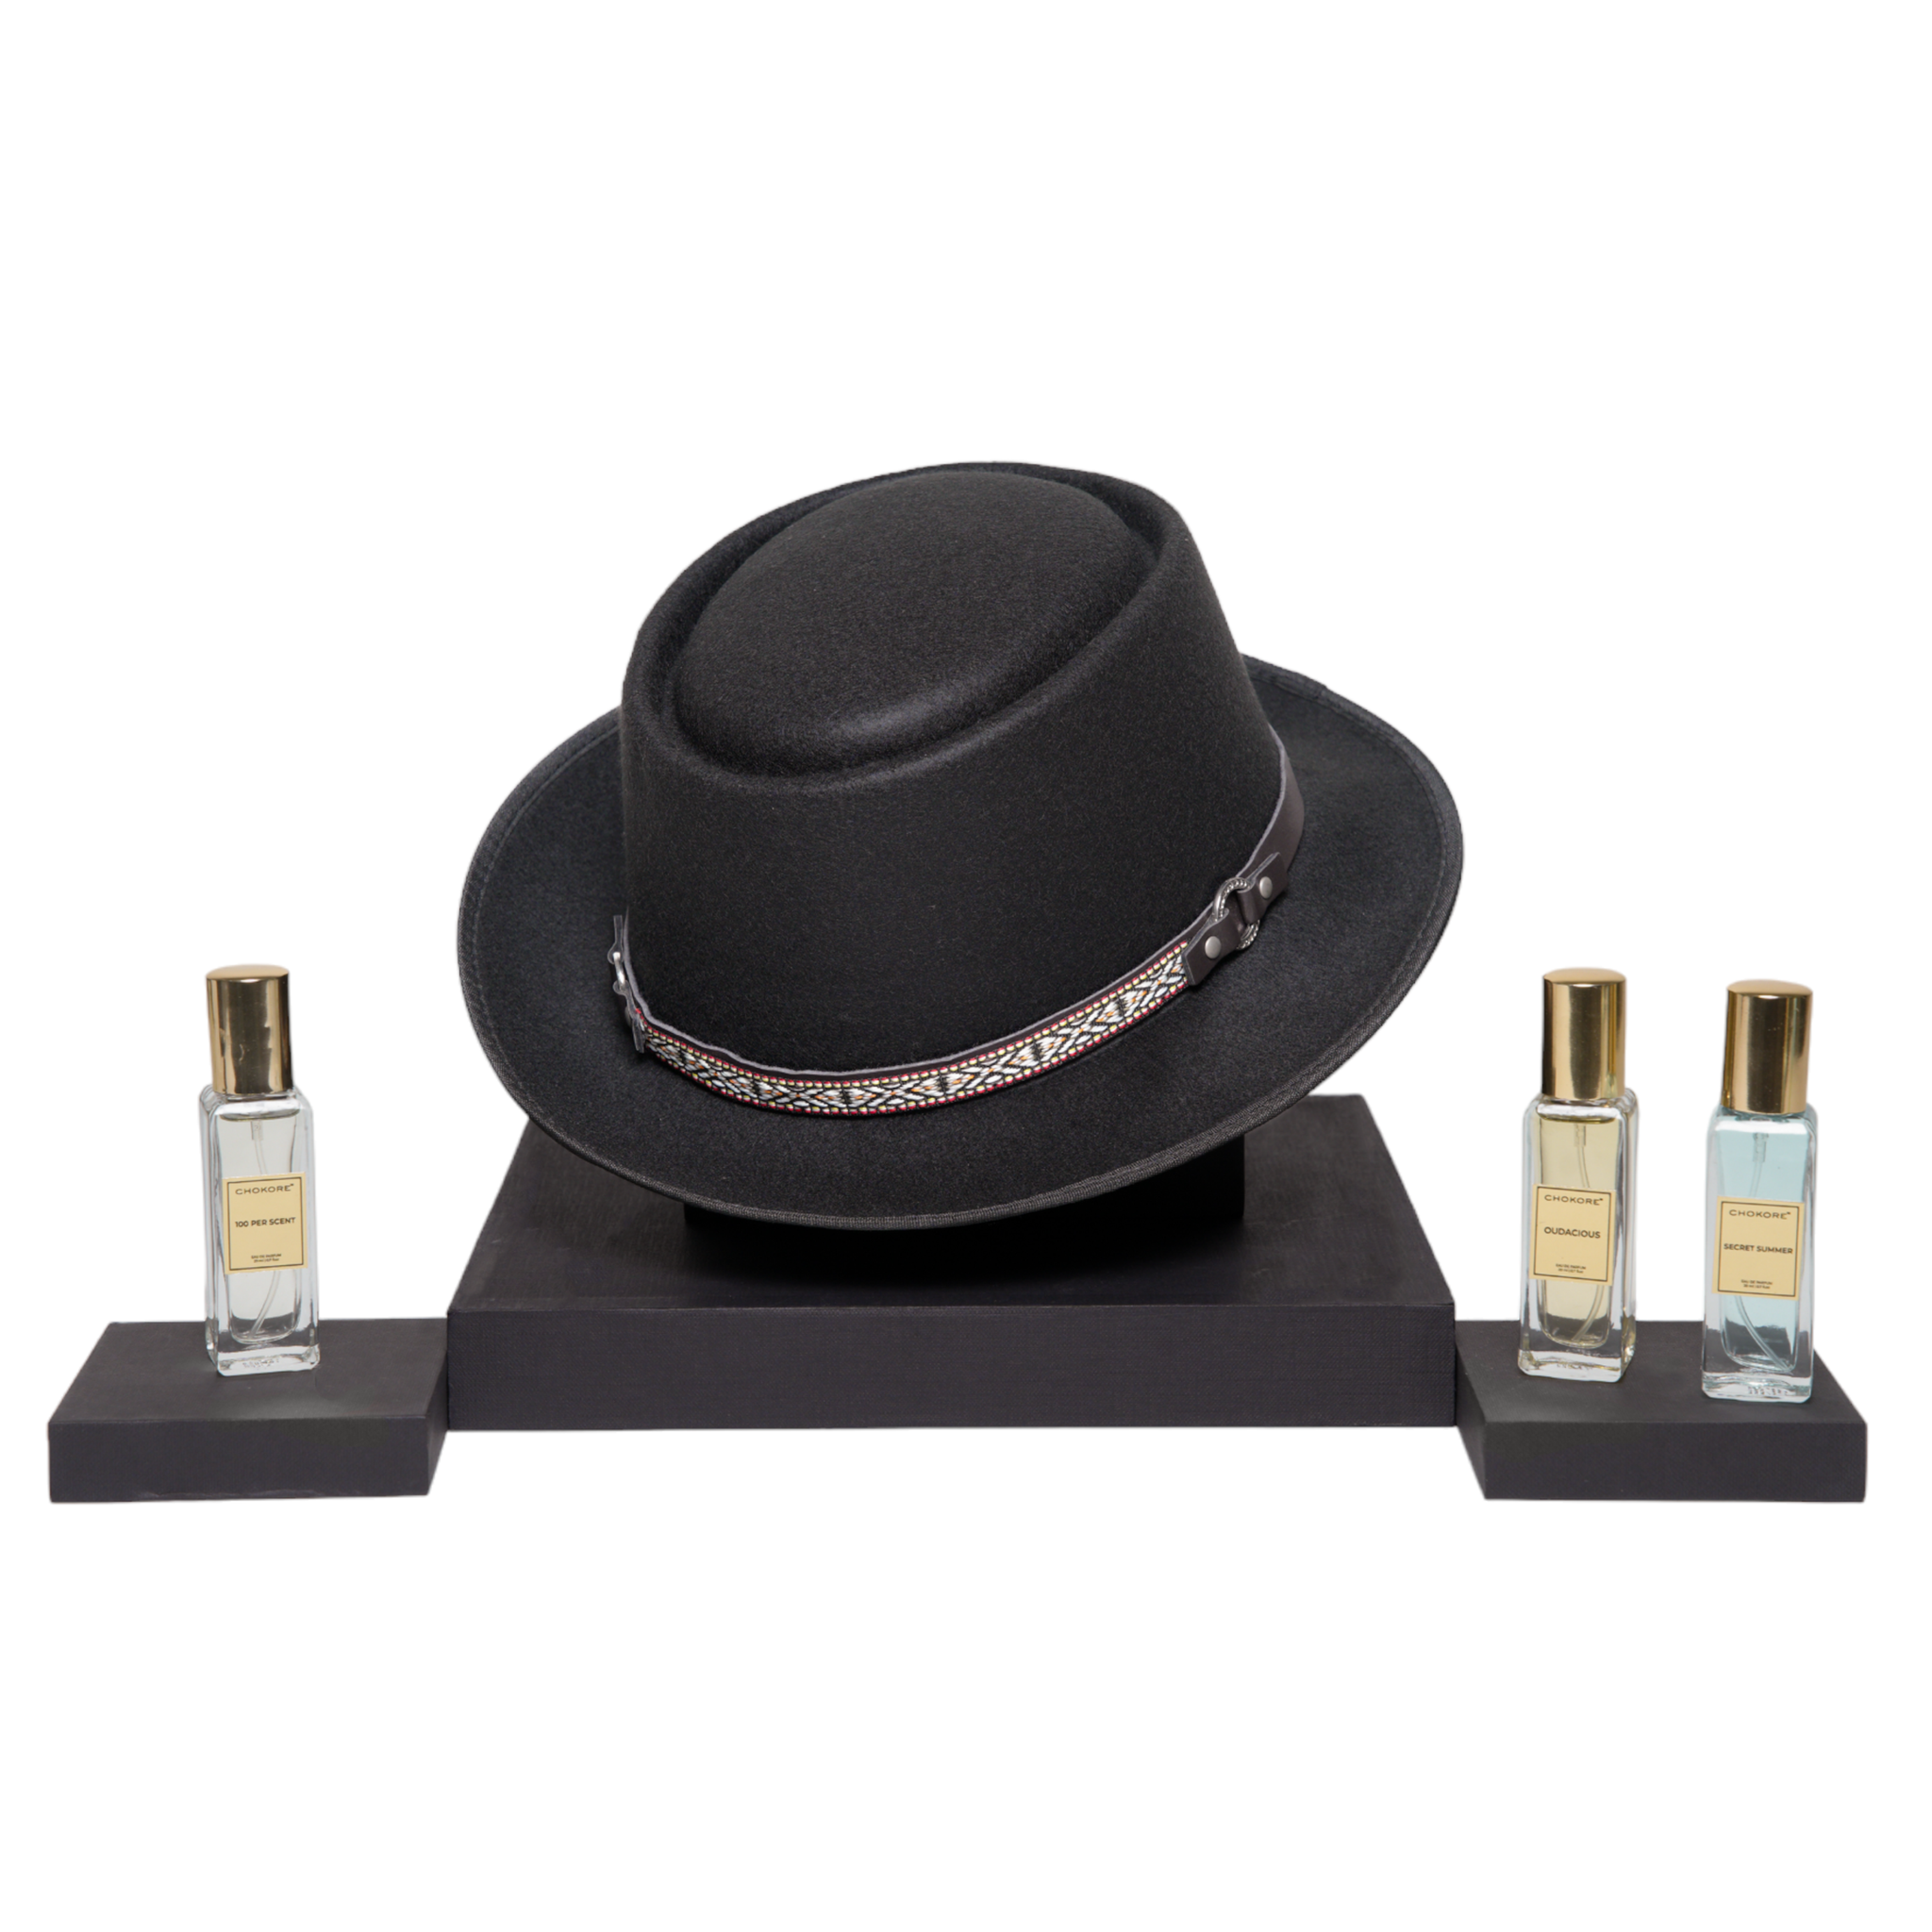 "Chokore Special 2-in-1 Gift Set for Him (Panama Hat, & Perfumes Combo)  "